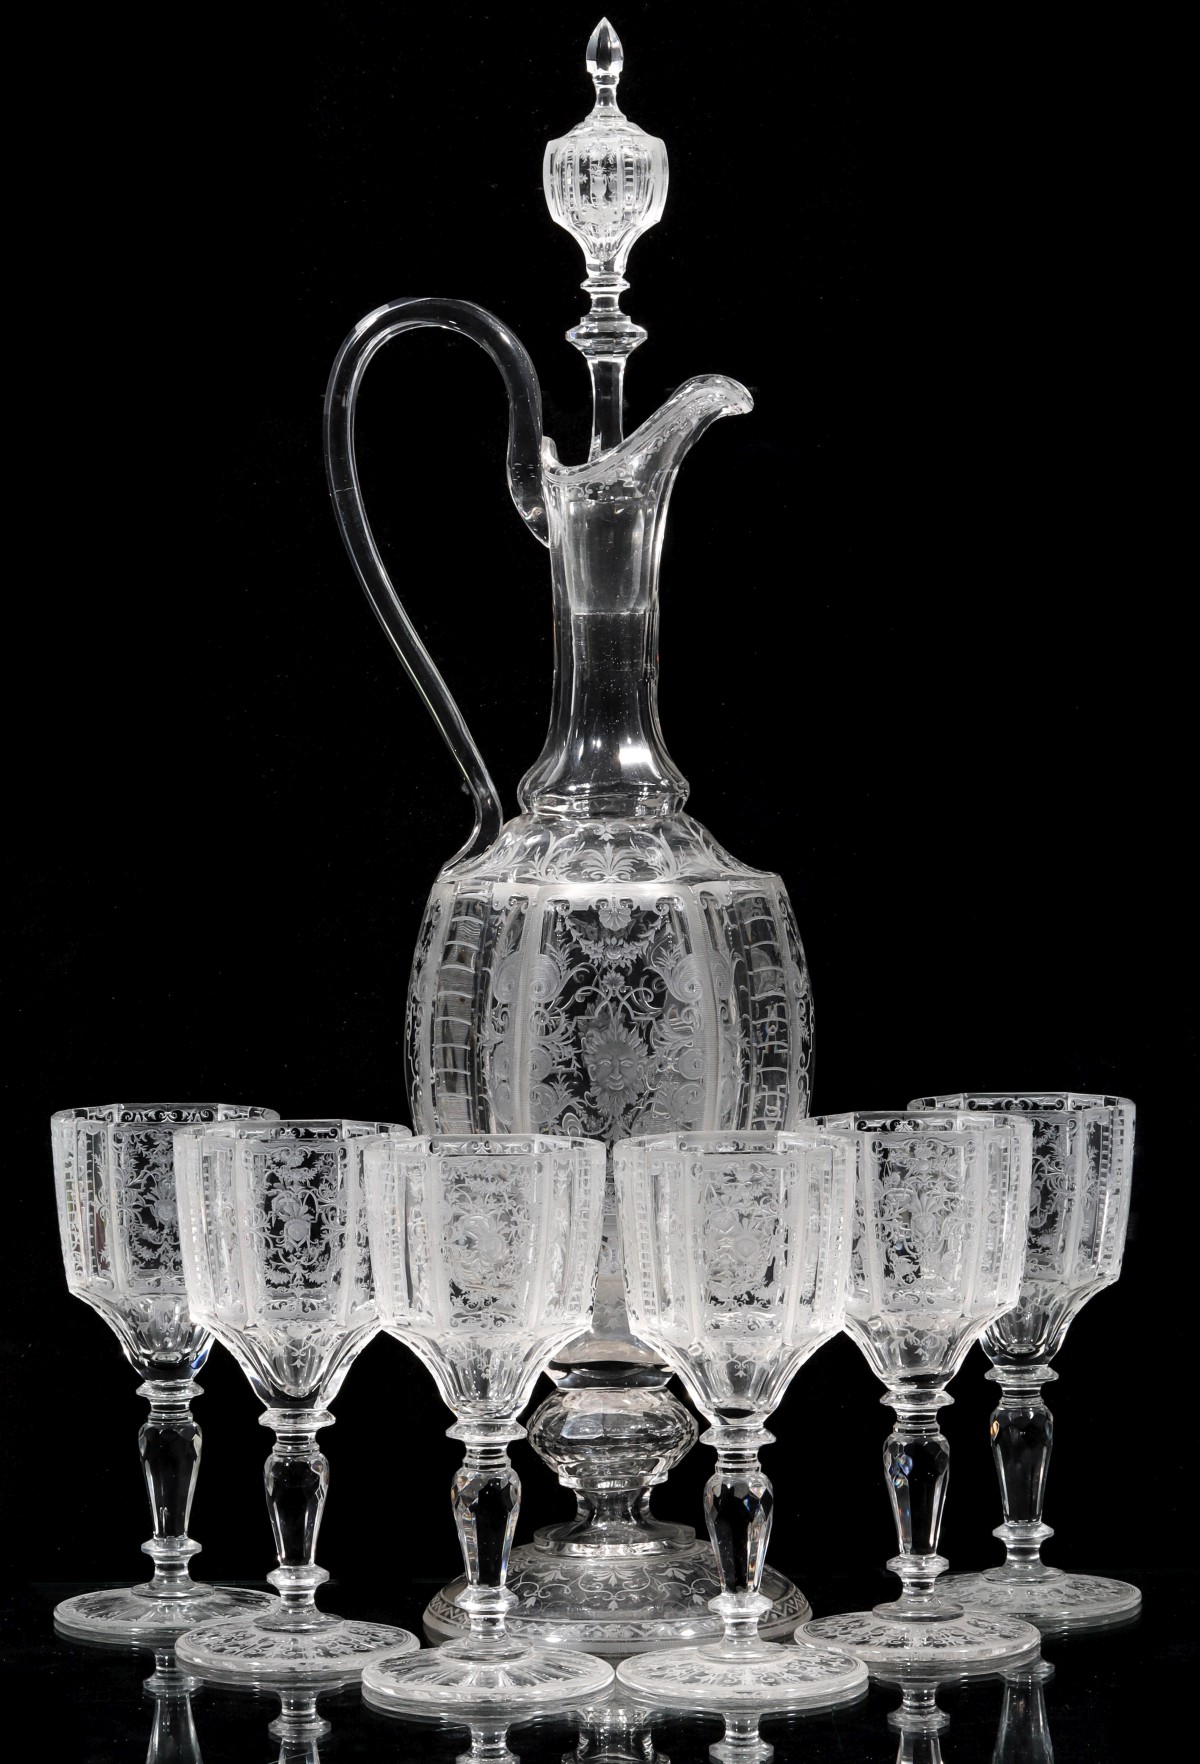 A FINE LATE 19TH CENTURY CONTINENTAL ENGRAVED WINE SET